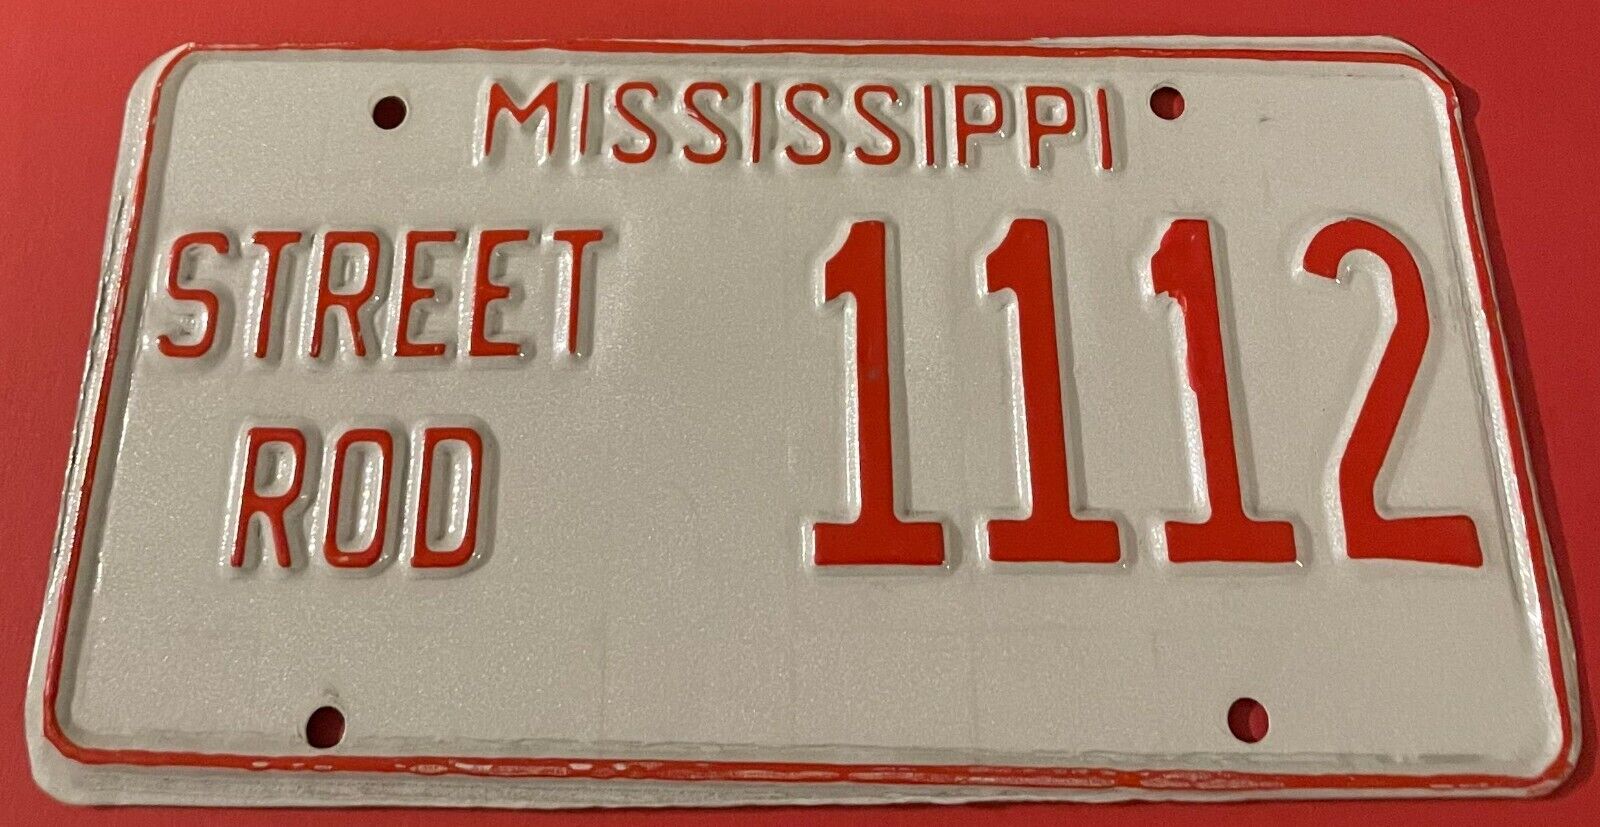 Mississippi Street Rod License Plate 1112 Hot Rod Classic Car Good Number